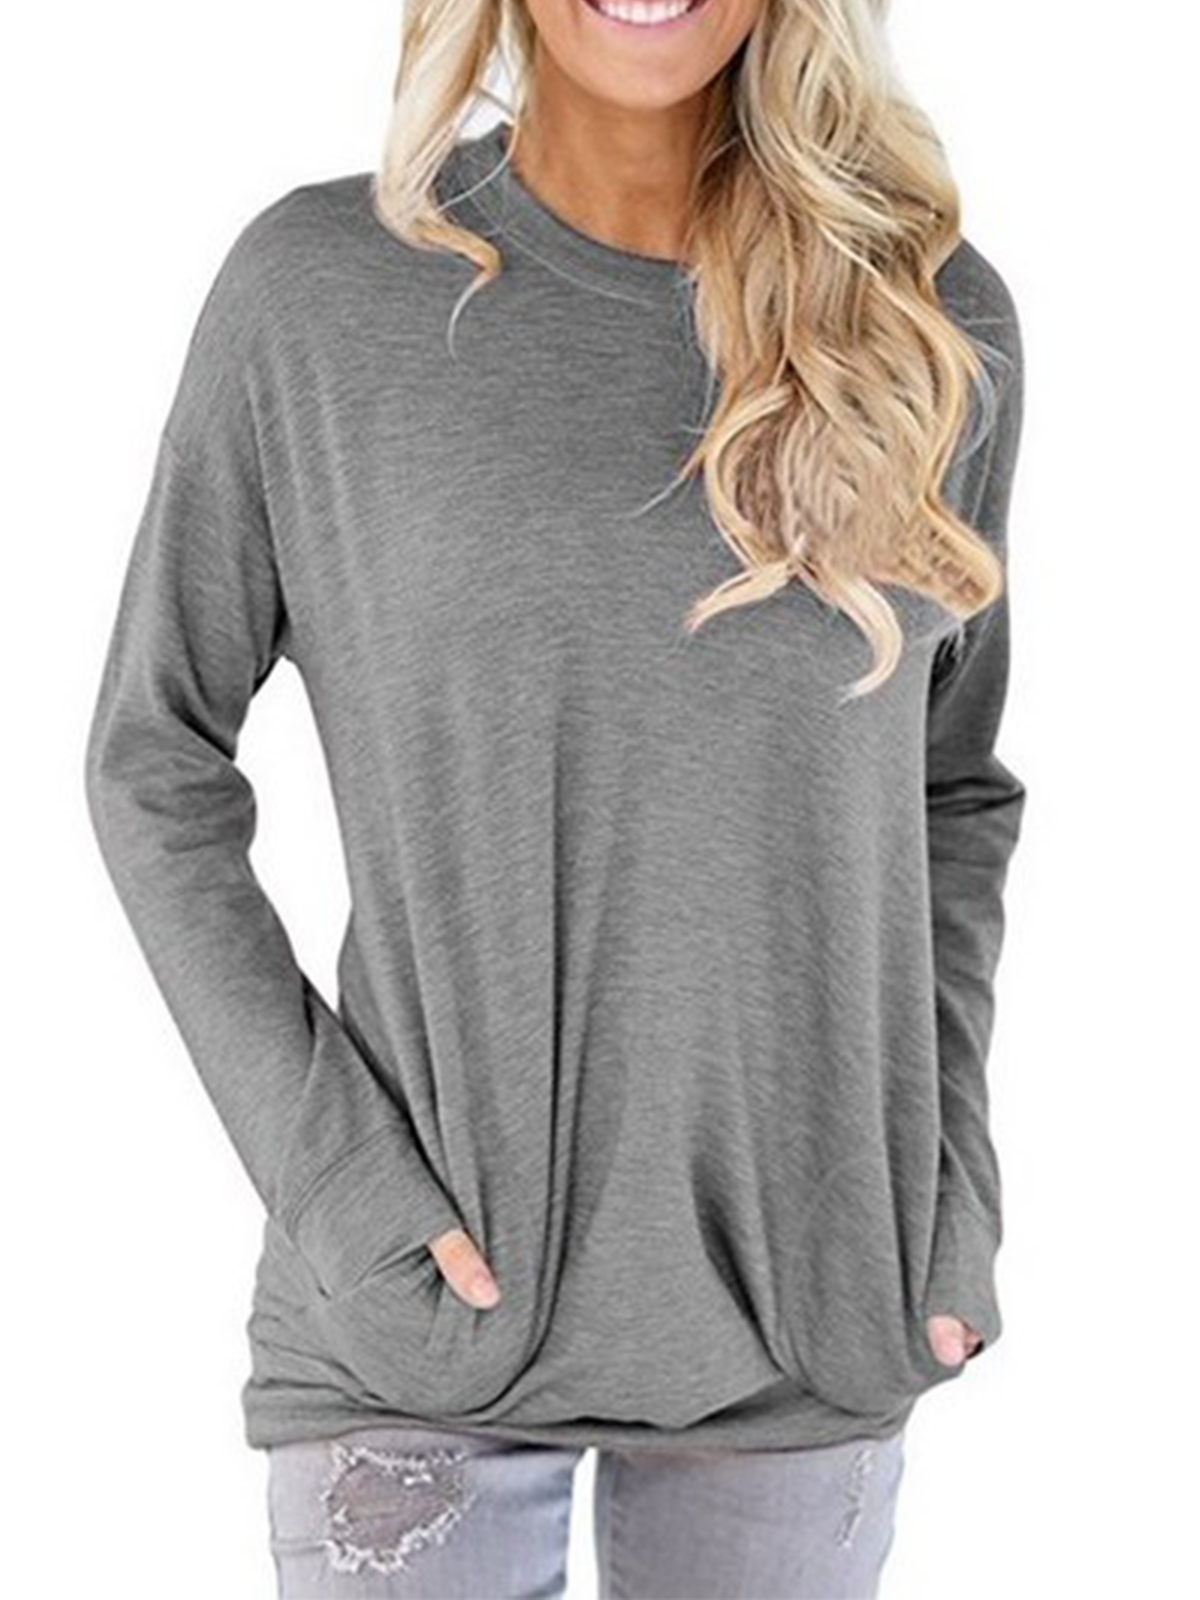 Women Long Sleeve Crew Neck Tops Blouse Jumpers Casual Loose Shirt Pullover